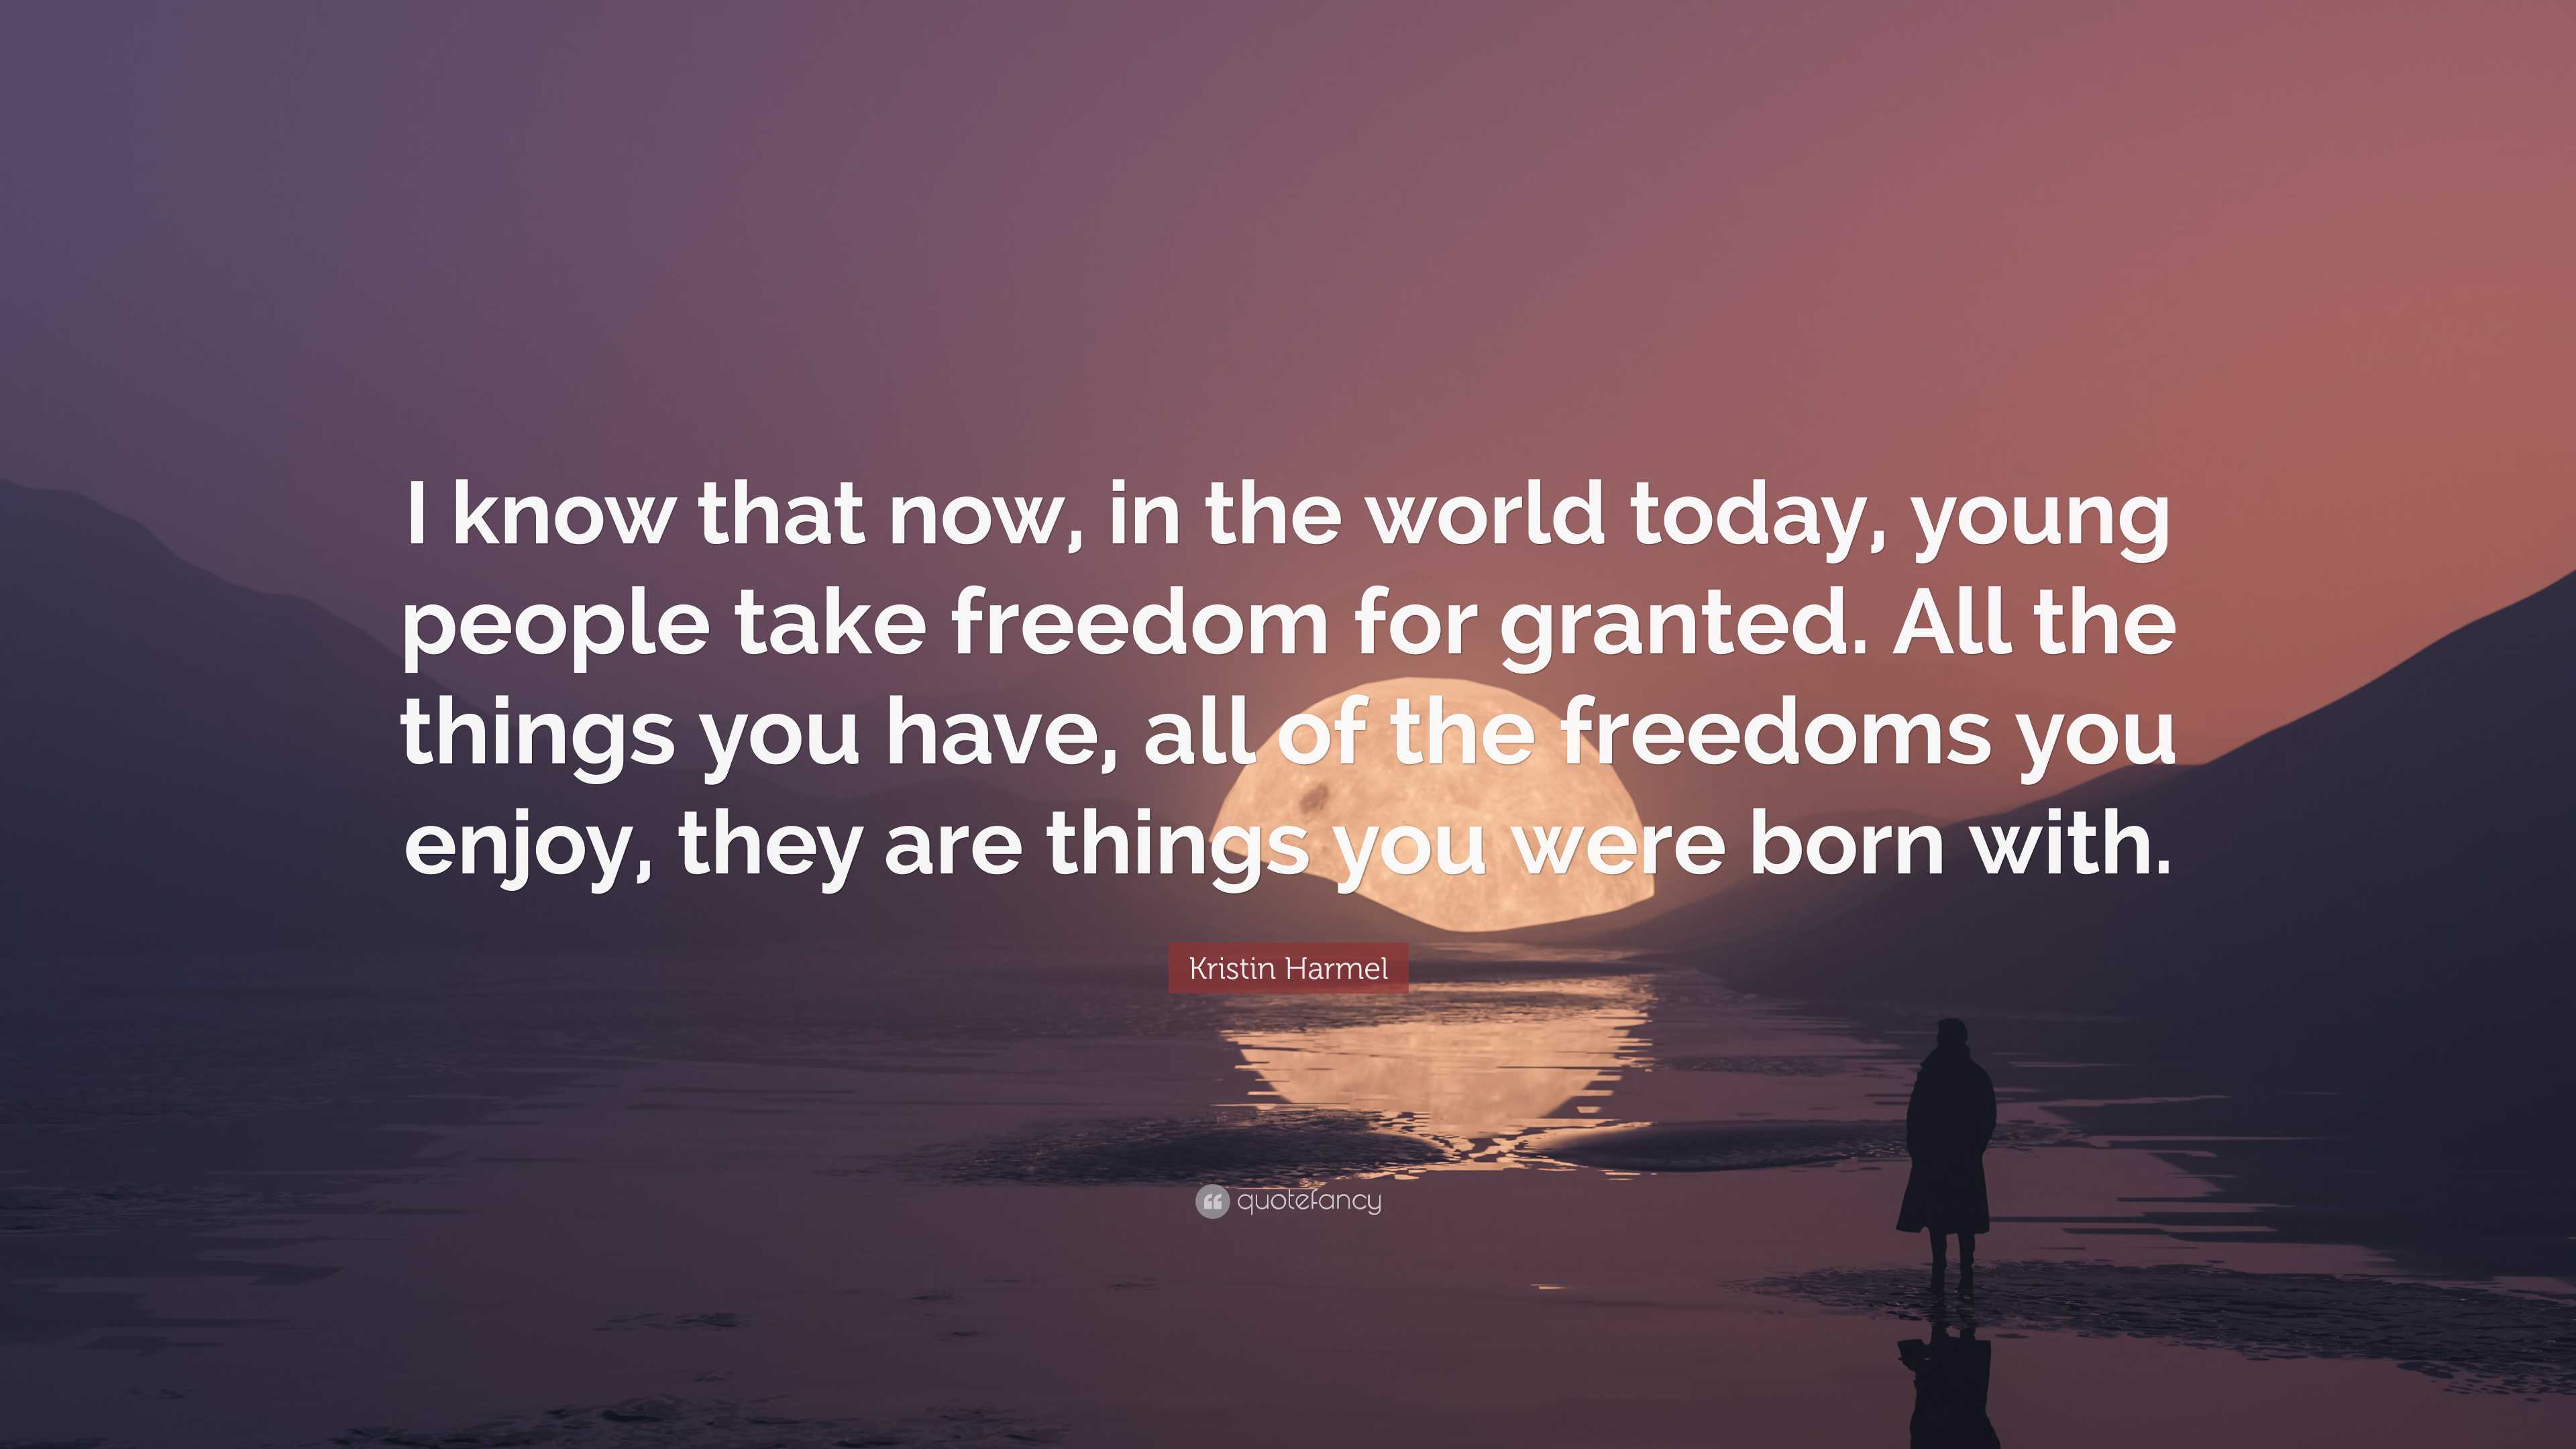 The Freedom, You Now Take For Granted '' - '' The Freedom, You Now